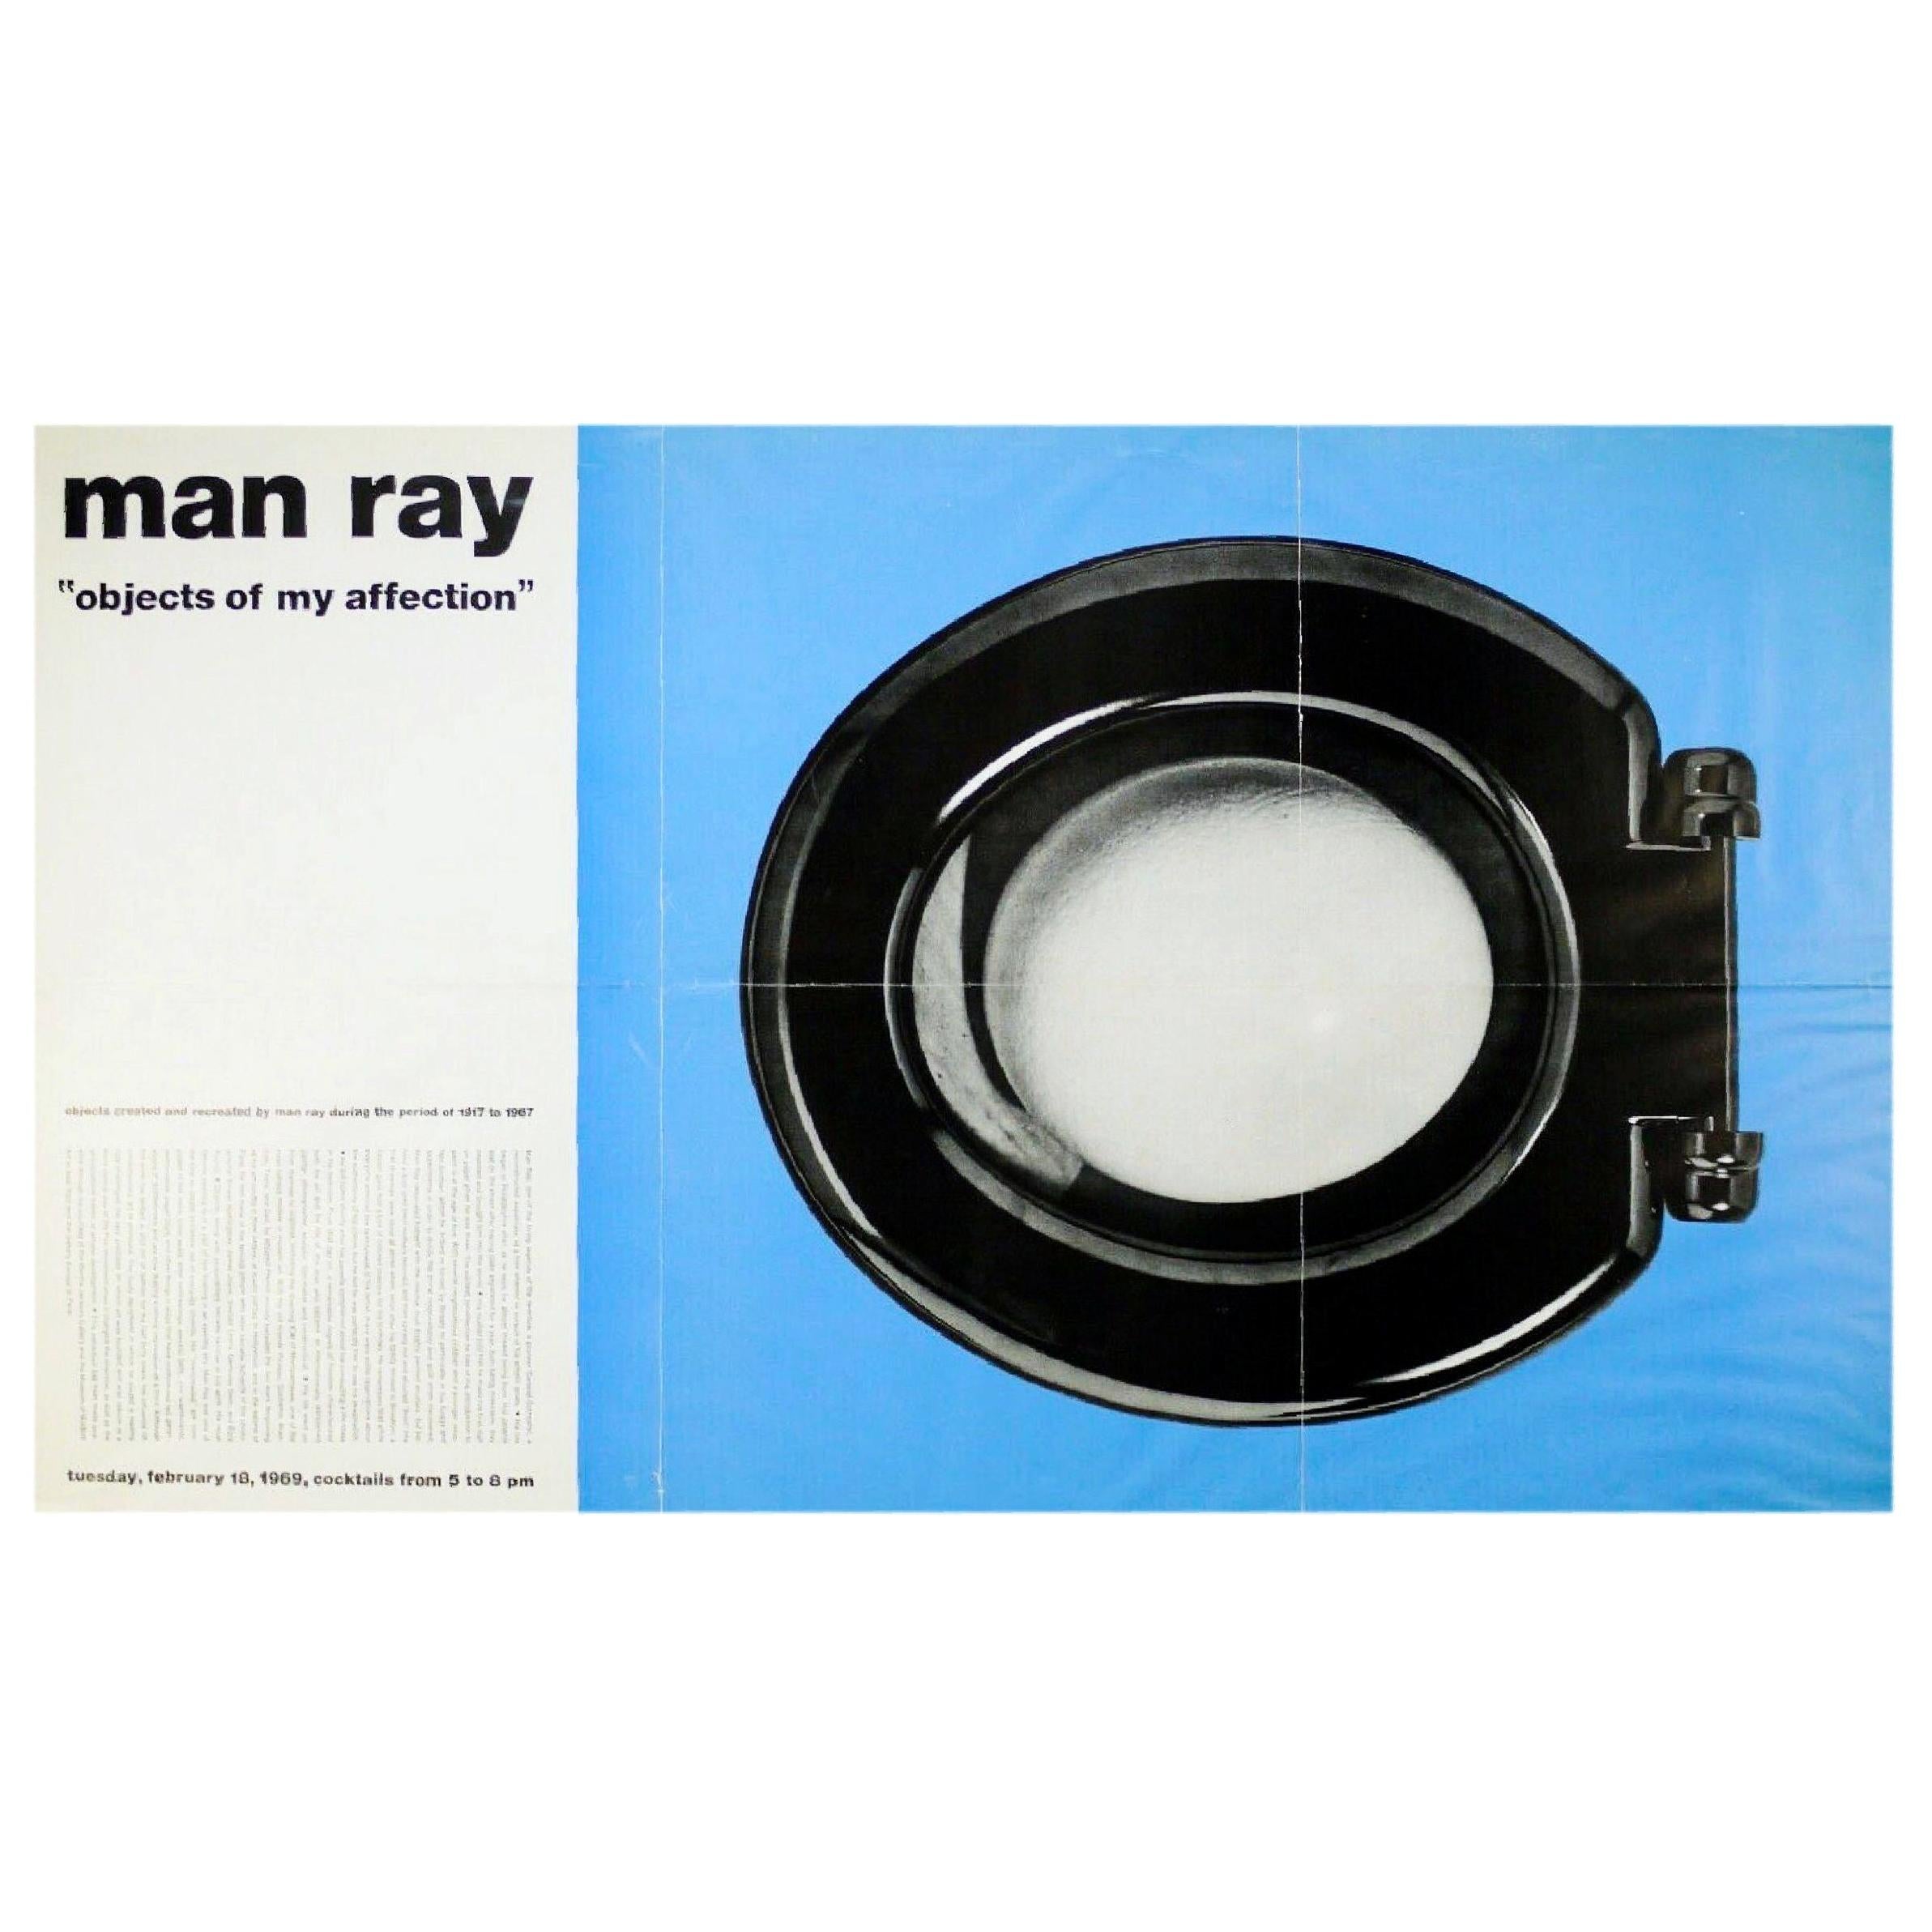 Man Ray Objects of my Affection Ausstellungsplakat Trompe L'Oeuf MoMA, 1969